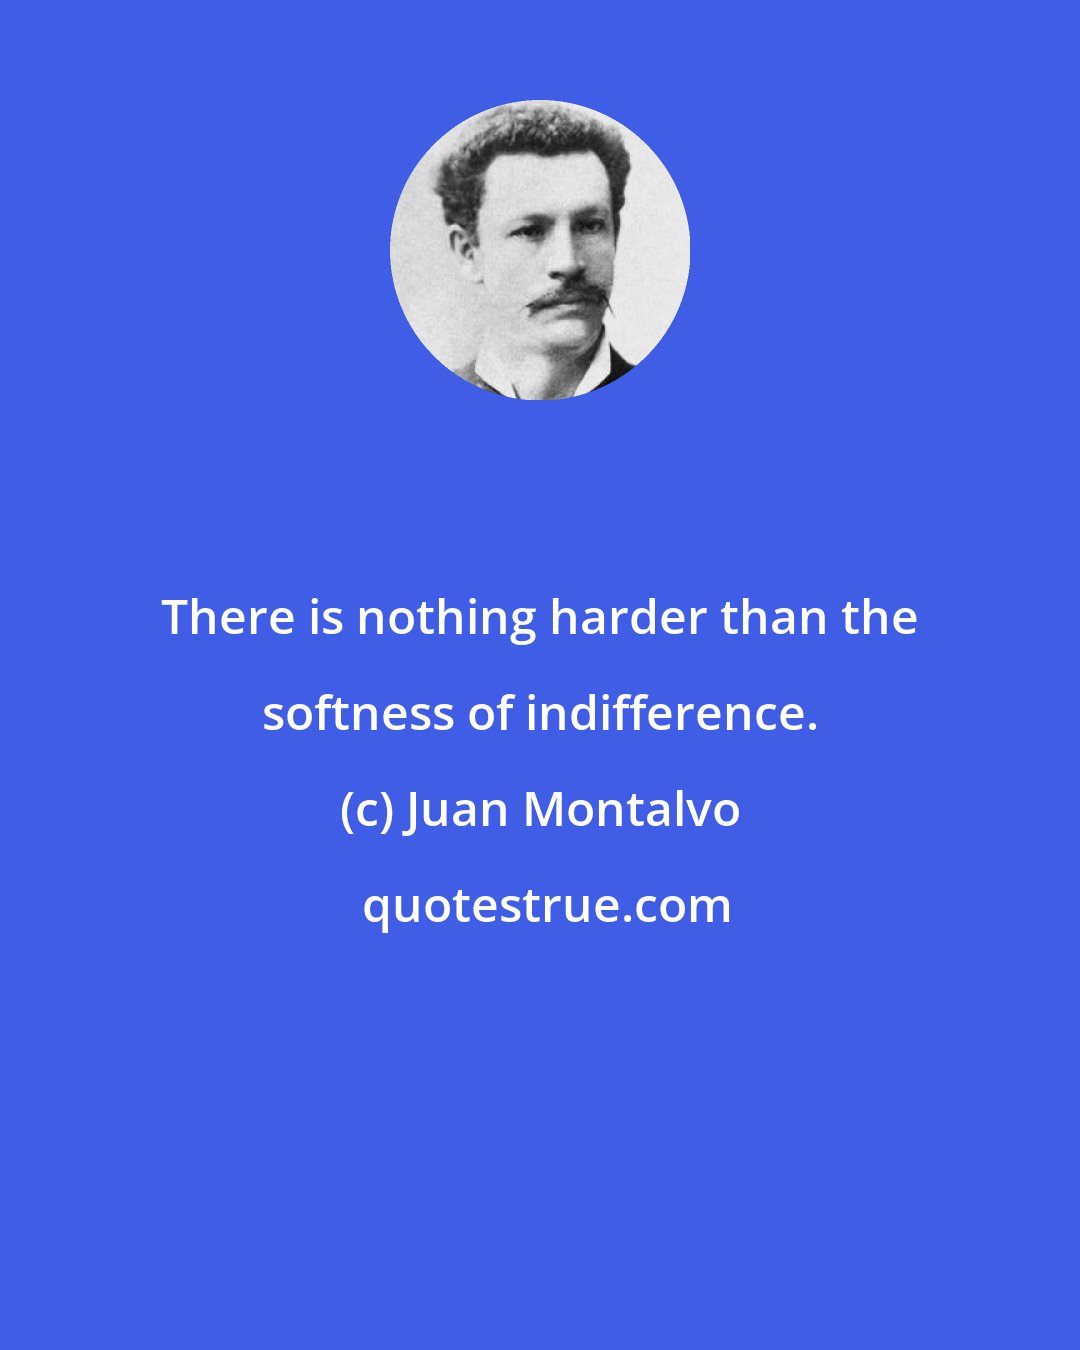 Juan Montalvo: There is nothing harder than the softness of indifference.